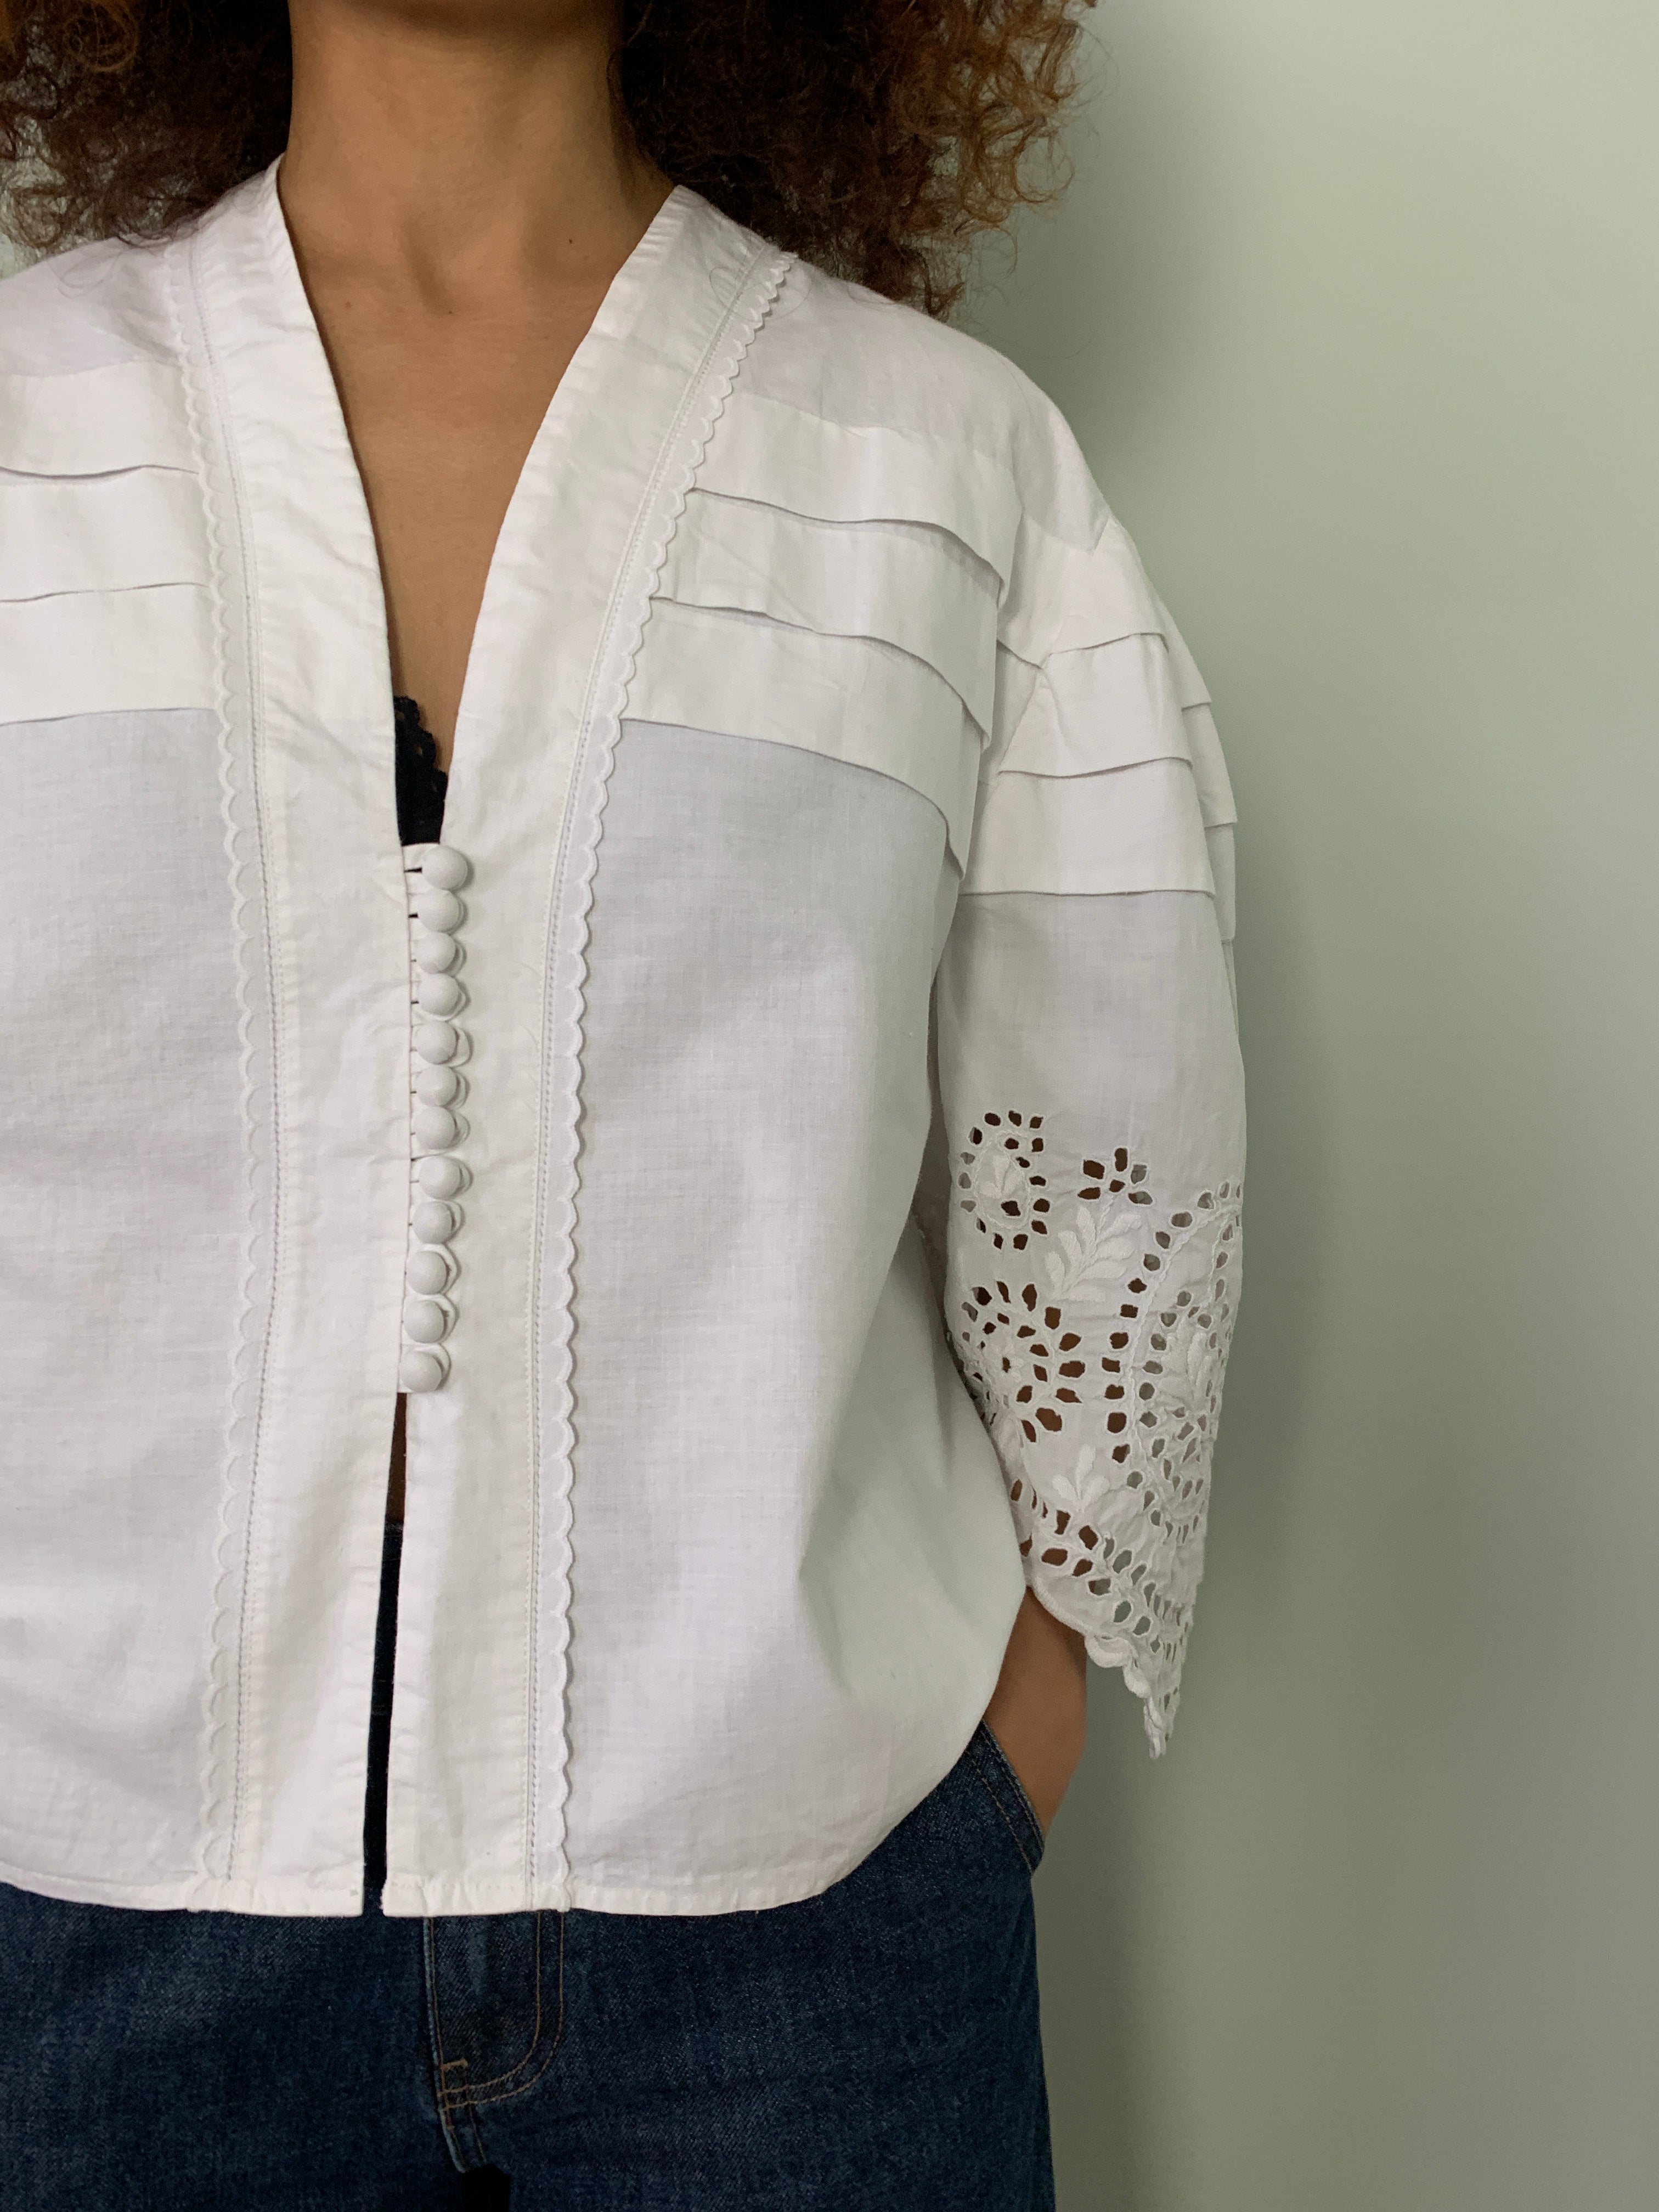 Vintage cotton hand embroidered blouse